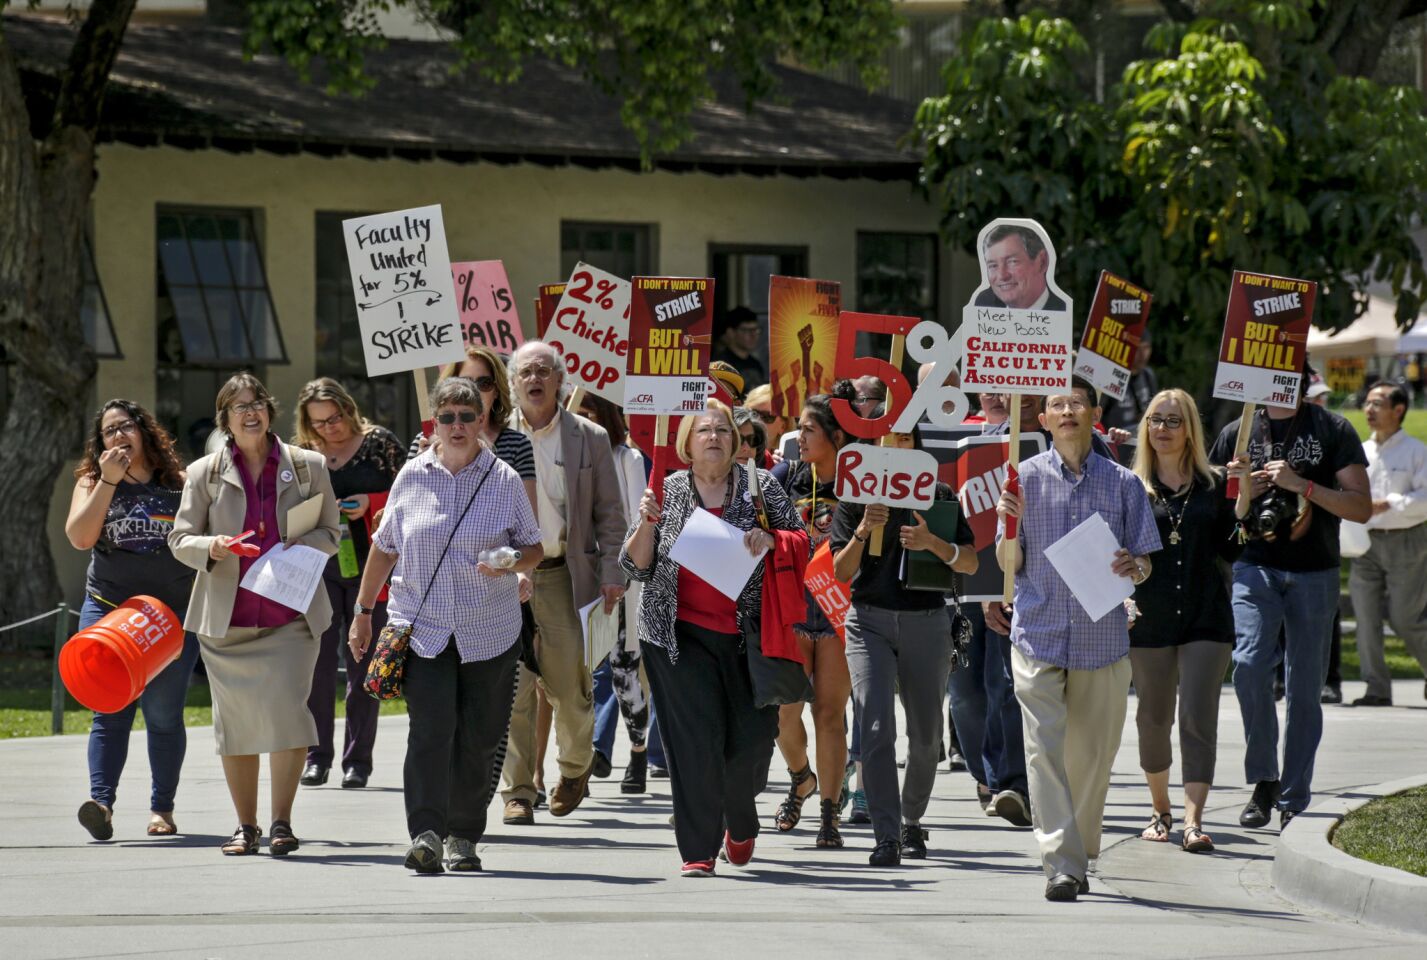 Faculty union members at Cal Poly Pomona, part of the Cal State system, practiced marching through campus in the days leading up to a scheduled strike last month. The strike was canceled after a last-minute deal was struck between union and university leaders.